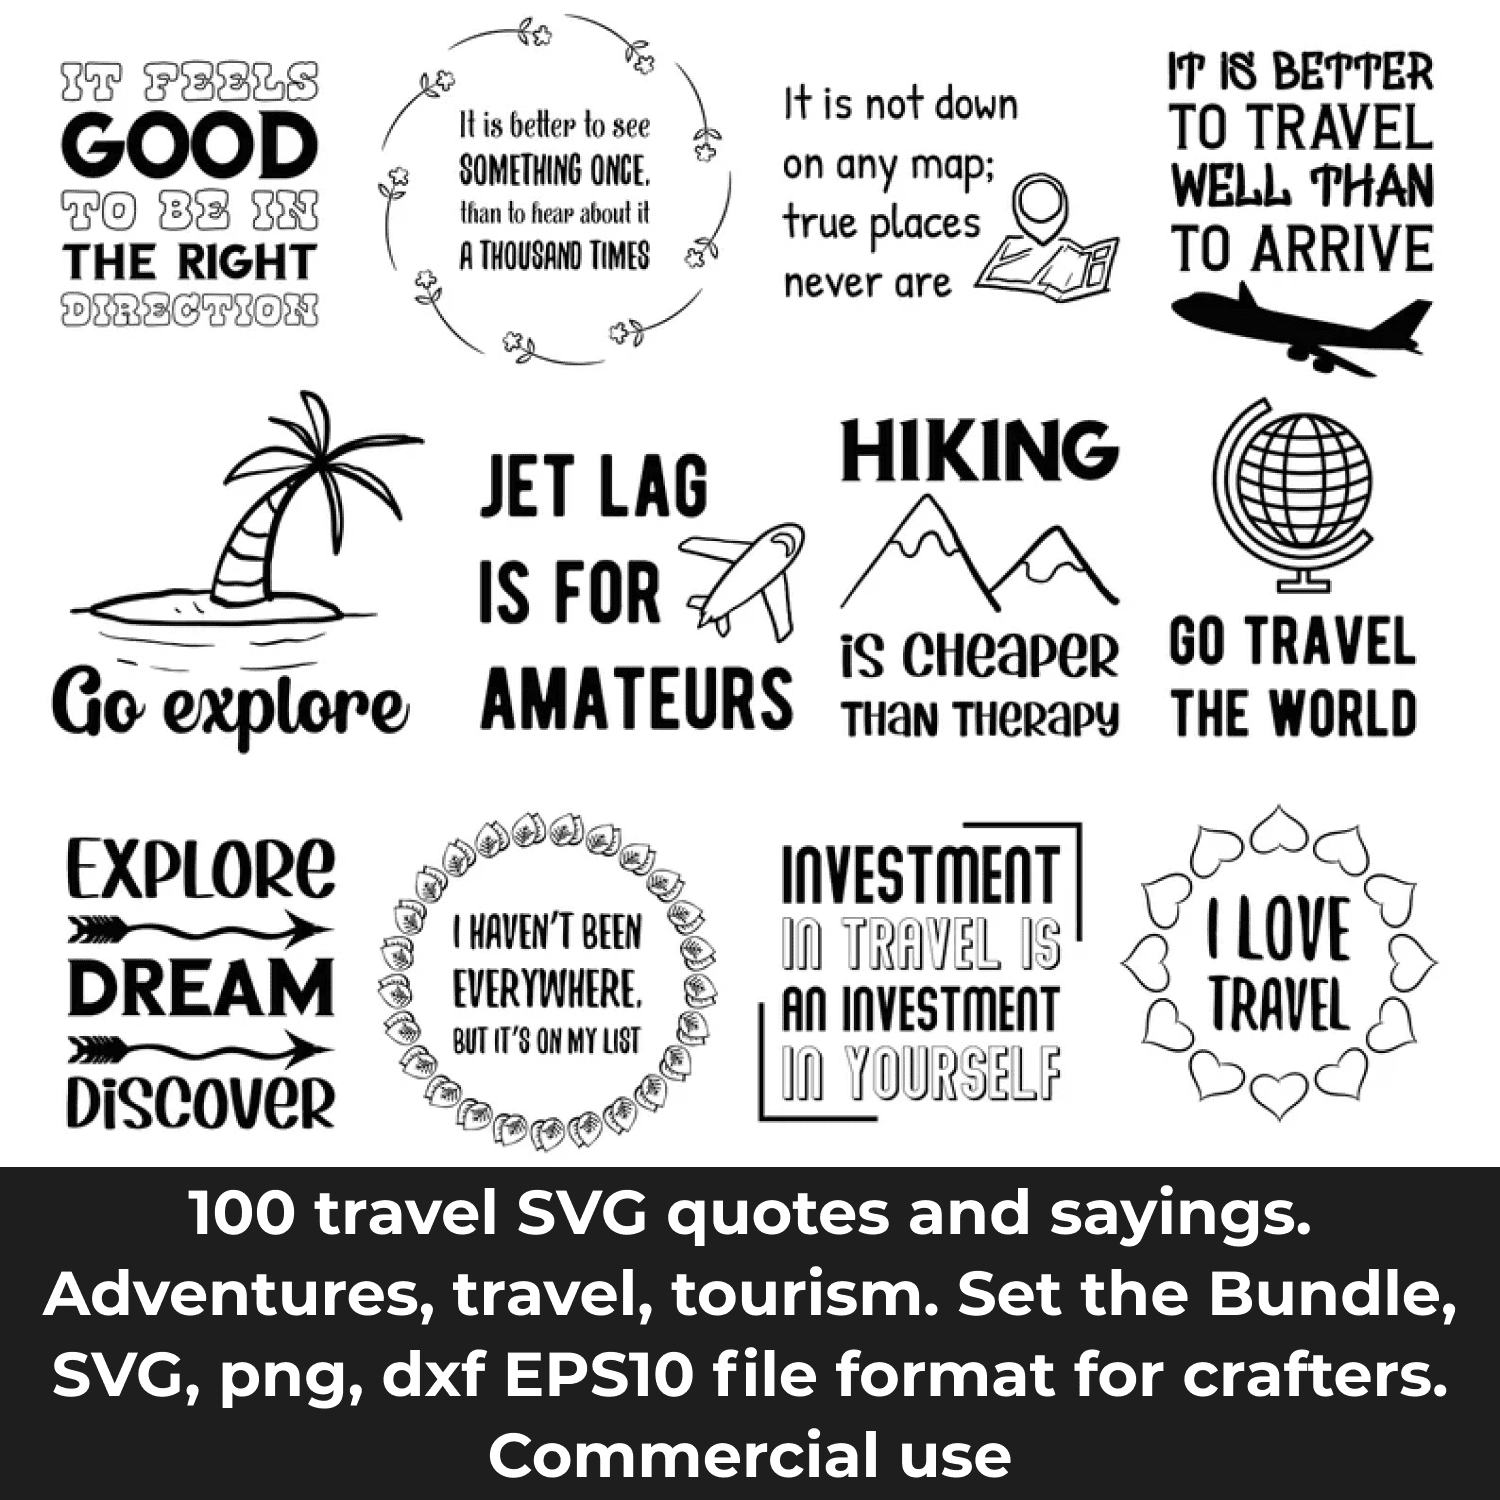 100 Travel SVG Quotes & Sayings cover.